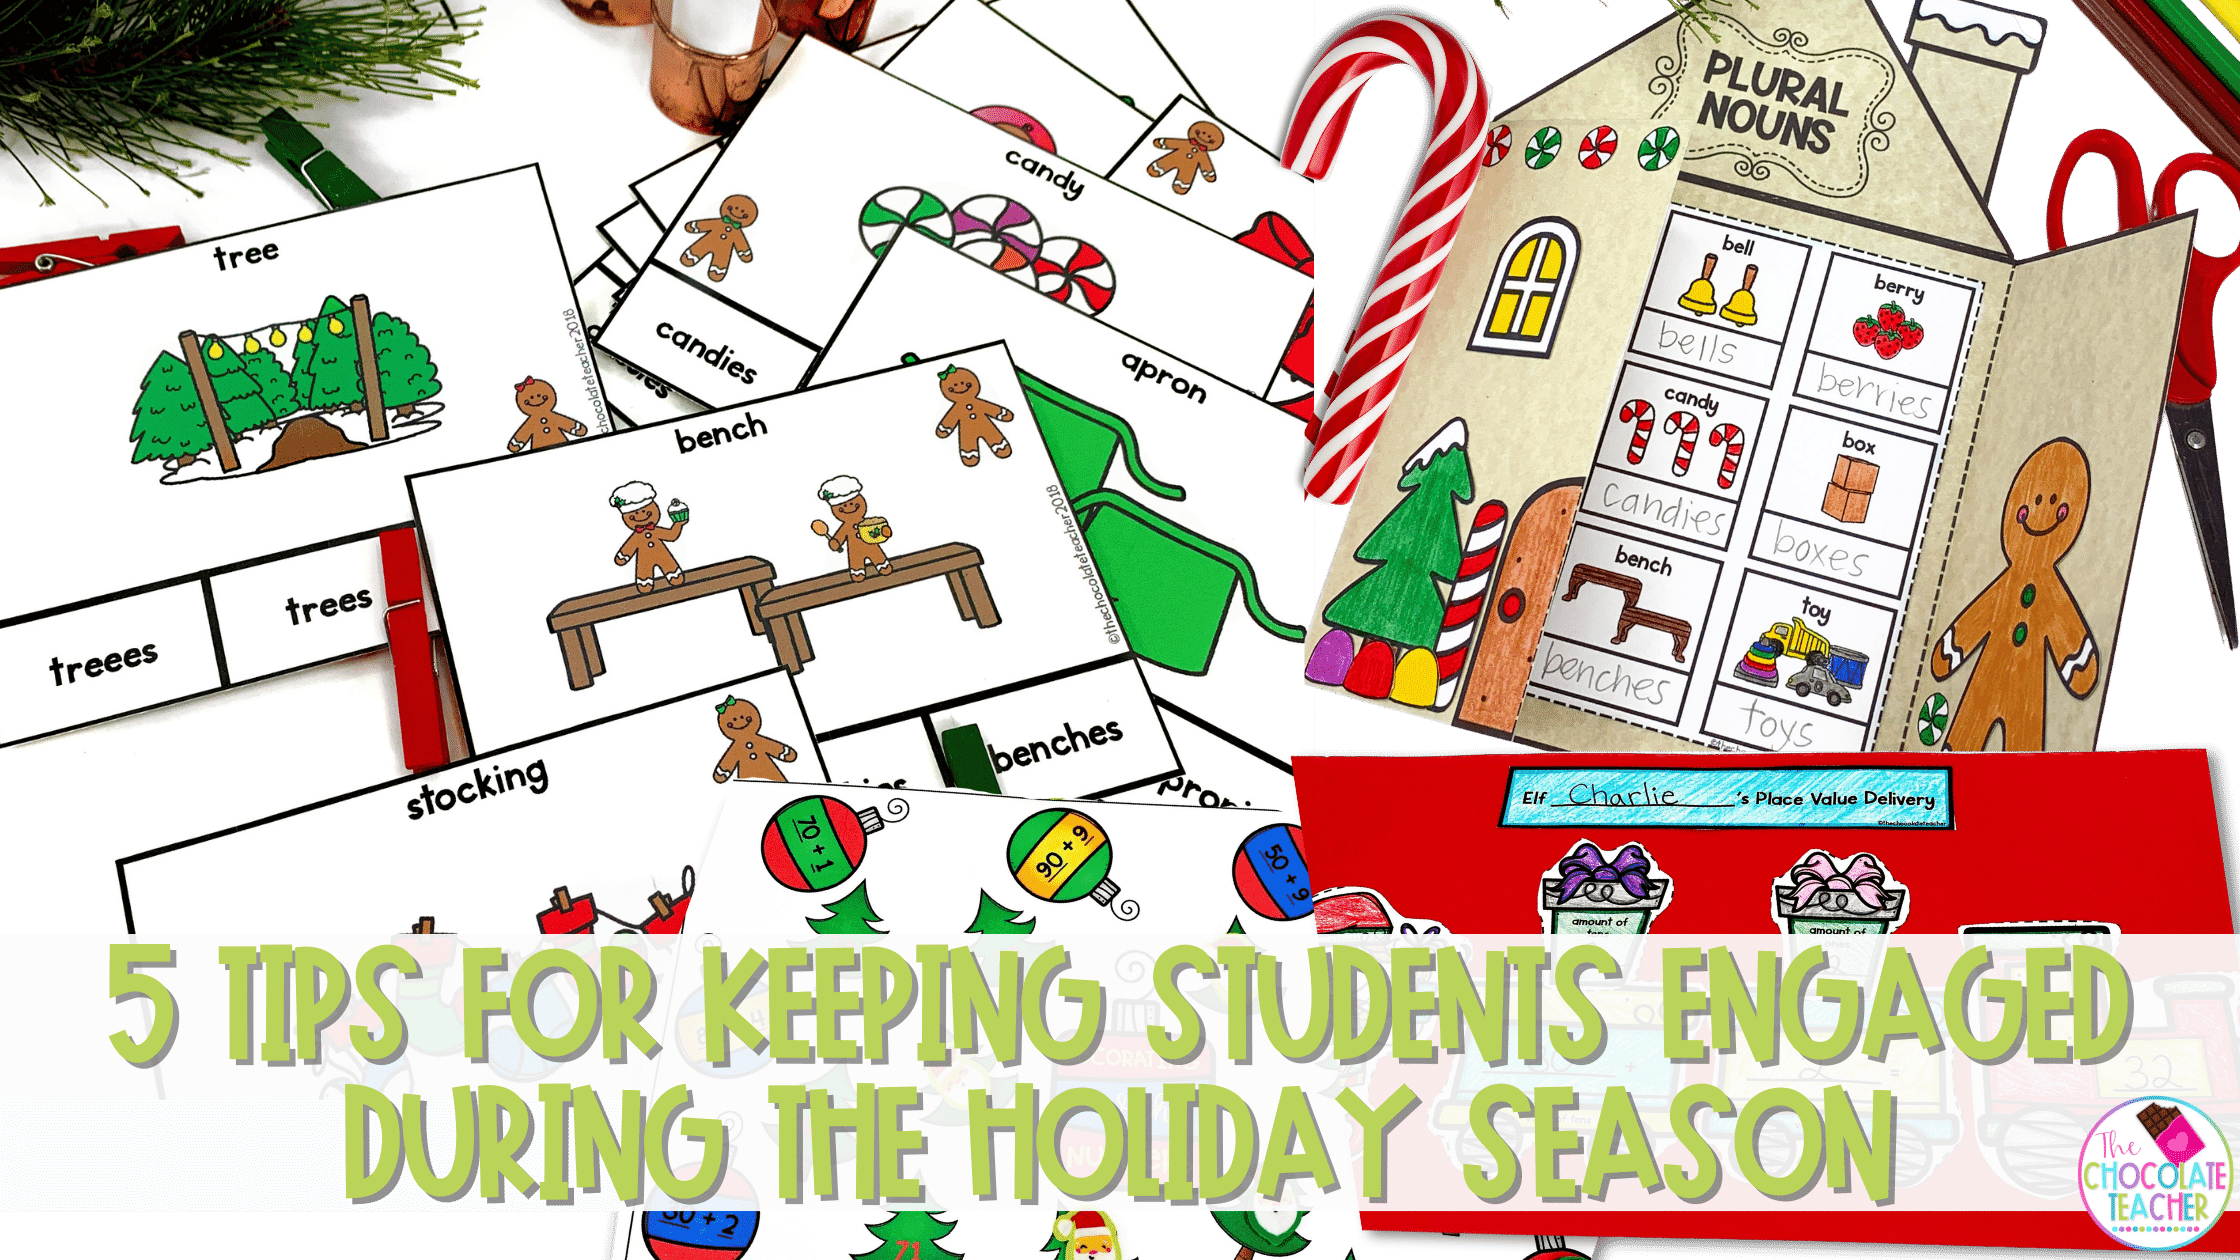 Maintaining holiday engagement is fun and easy when you've got the right activities planned! Come along to see these ideas for keeping students engaged during the holiday season.